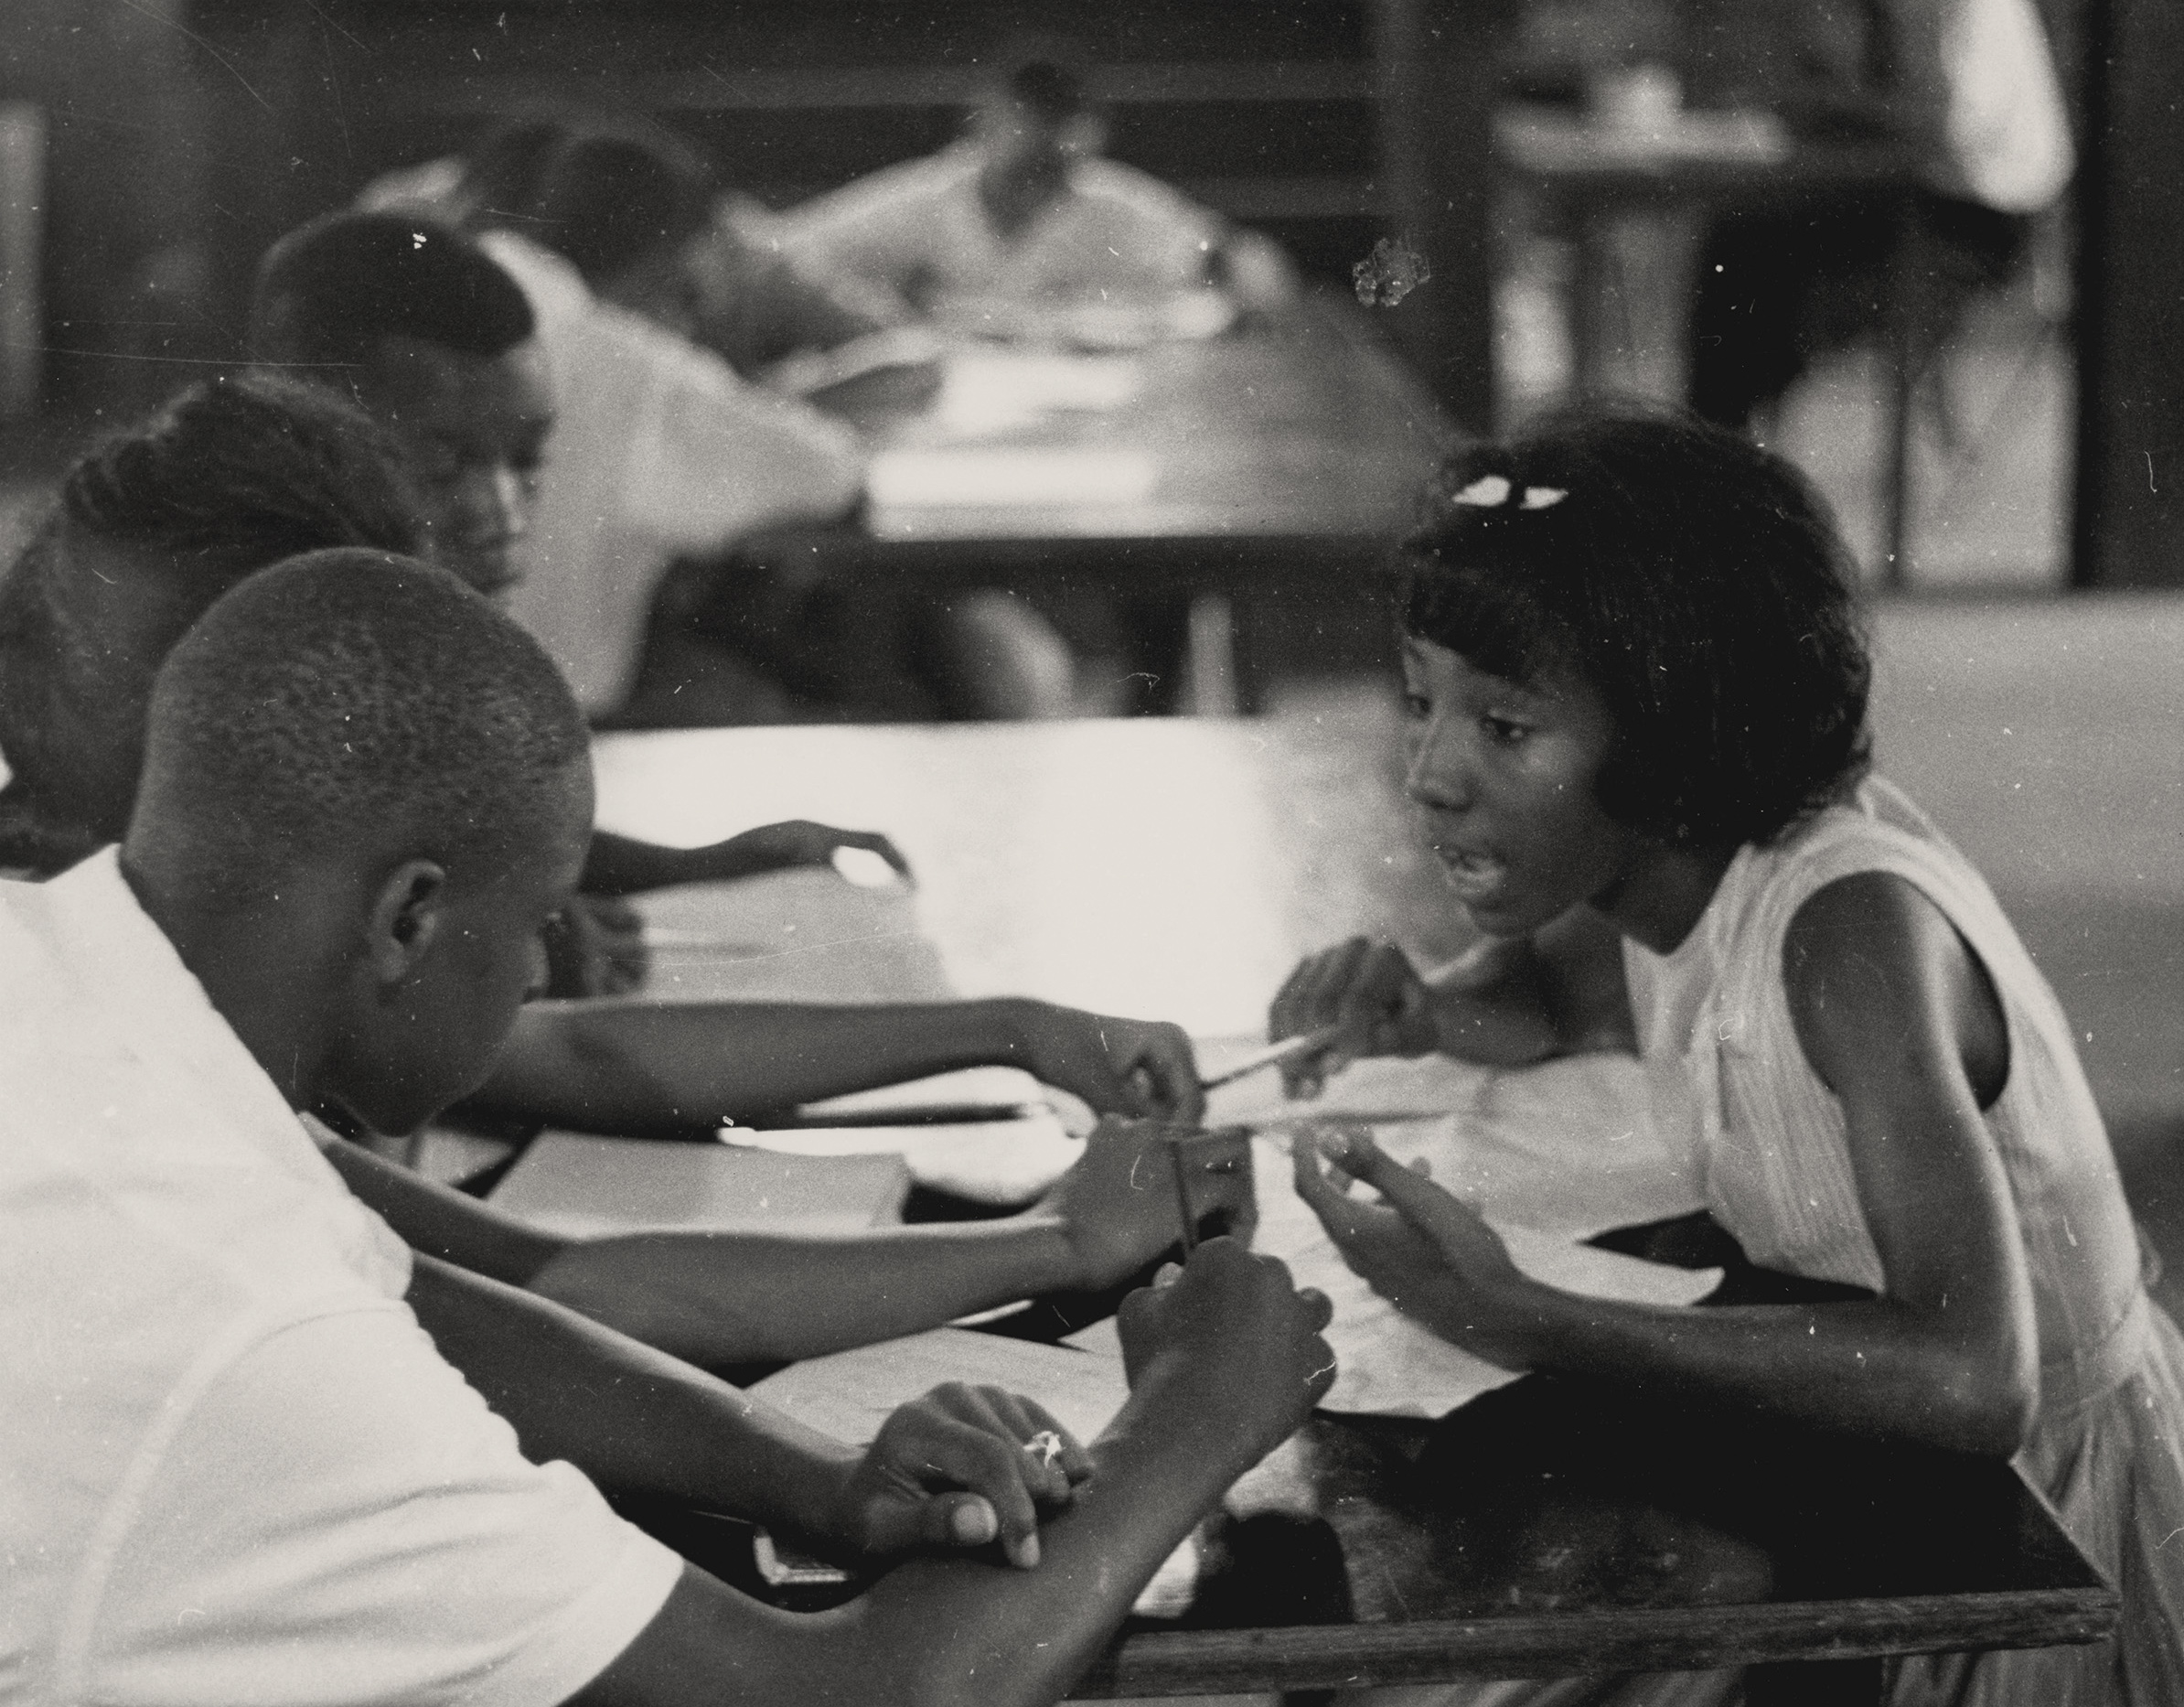 Freedom School Discussion, 1964. Photograph by Herbert Randall. Four Freedom School students engage in discussion while sitting at a table in the basement room of an African American church in Hattiesburg, Mississippi, during Freedom Summer. Alice Adams (right) is the only person identified in the photograph. M351 Herbert Randall Freedom Summer Photographs, Historical Manuscripts, The University of Southern Mississippi.